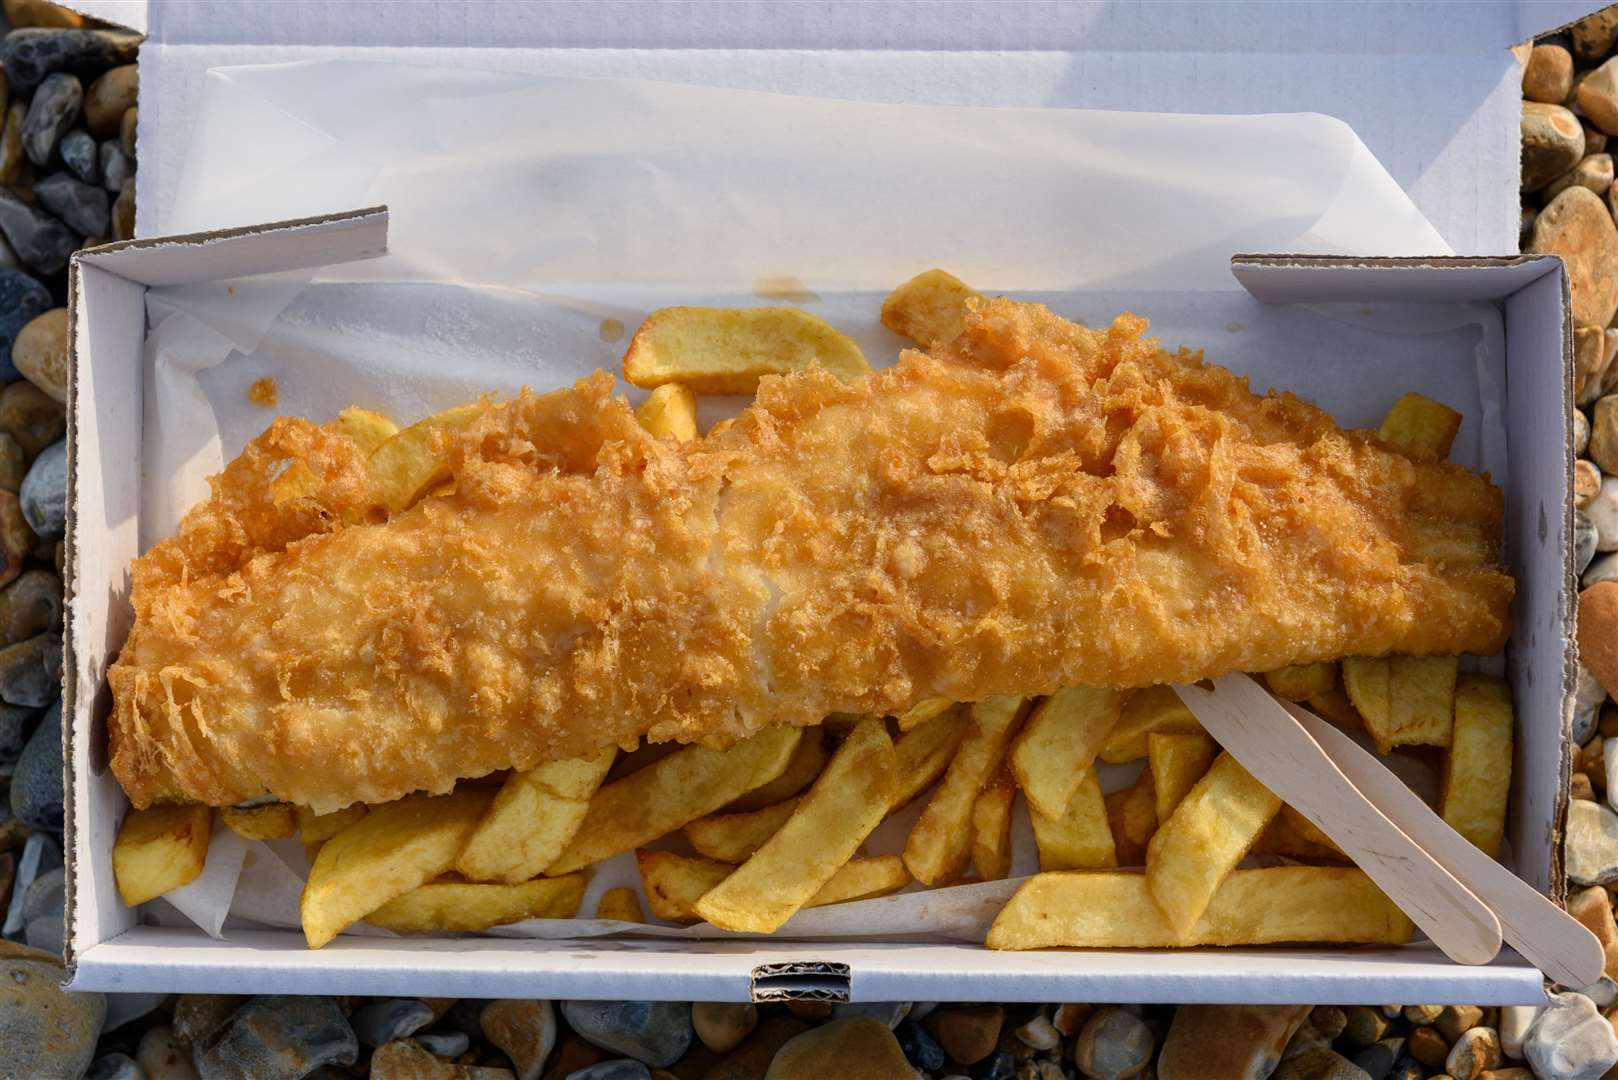 May 27 2022 marks National Fish and Chips Day. We asked our readers to share their favourite places.